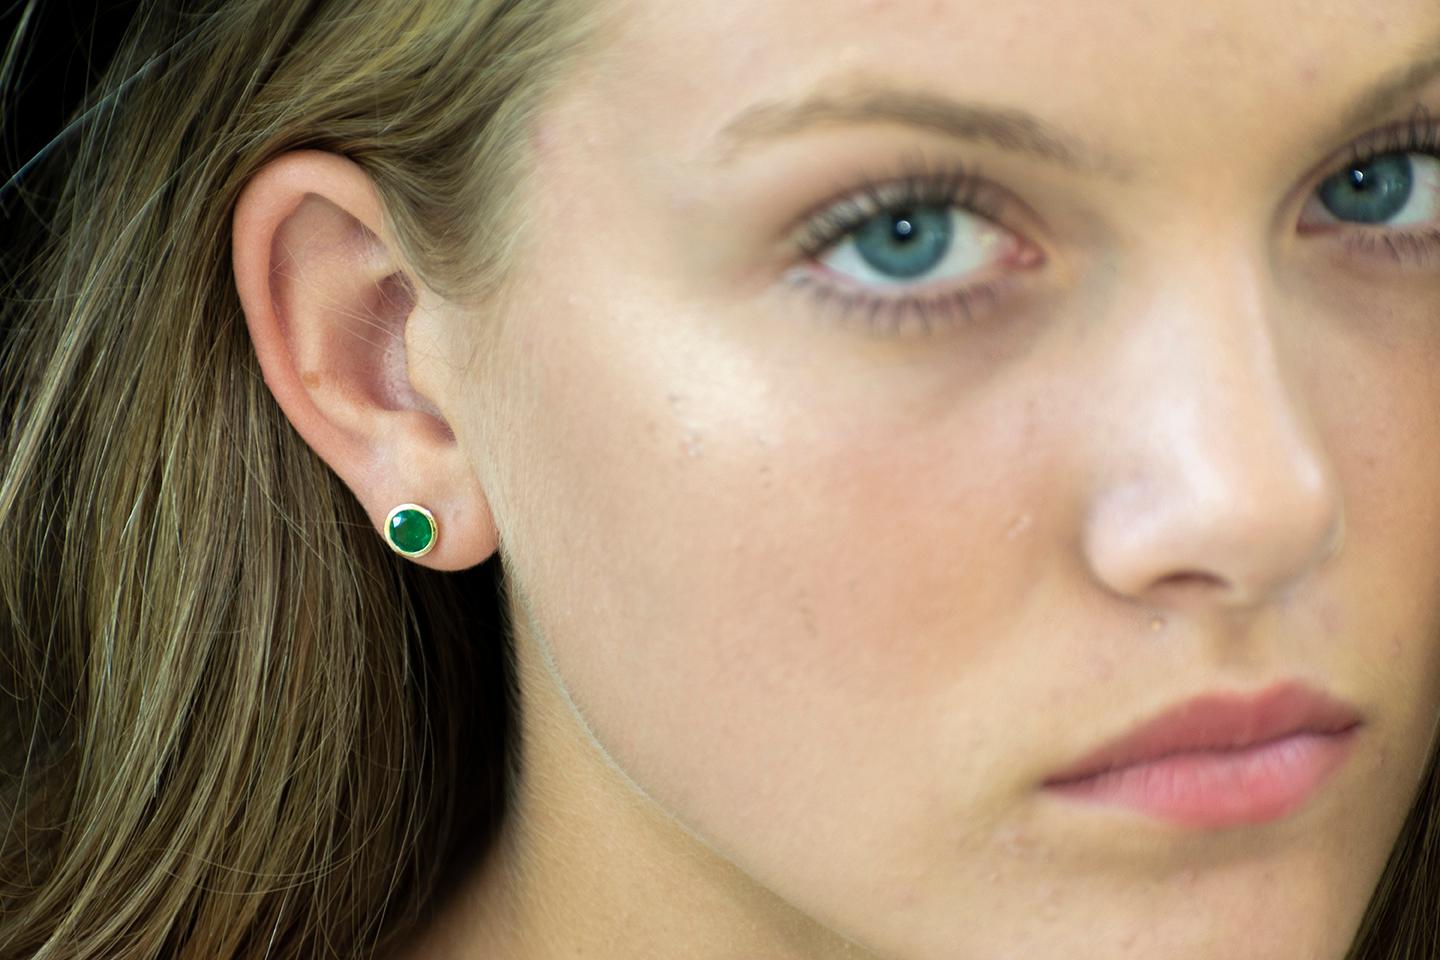 Featuring 14k yellow gold bezel-set 6 mm Colombian emerald stud earrings 
Emerald weighing 1.30 carats
width of the earrings 6.85 mm
New Earrings
Our design team select gemstones for their quality, aesthetic beauty and sale value of the featured